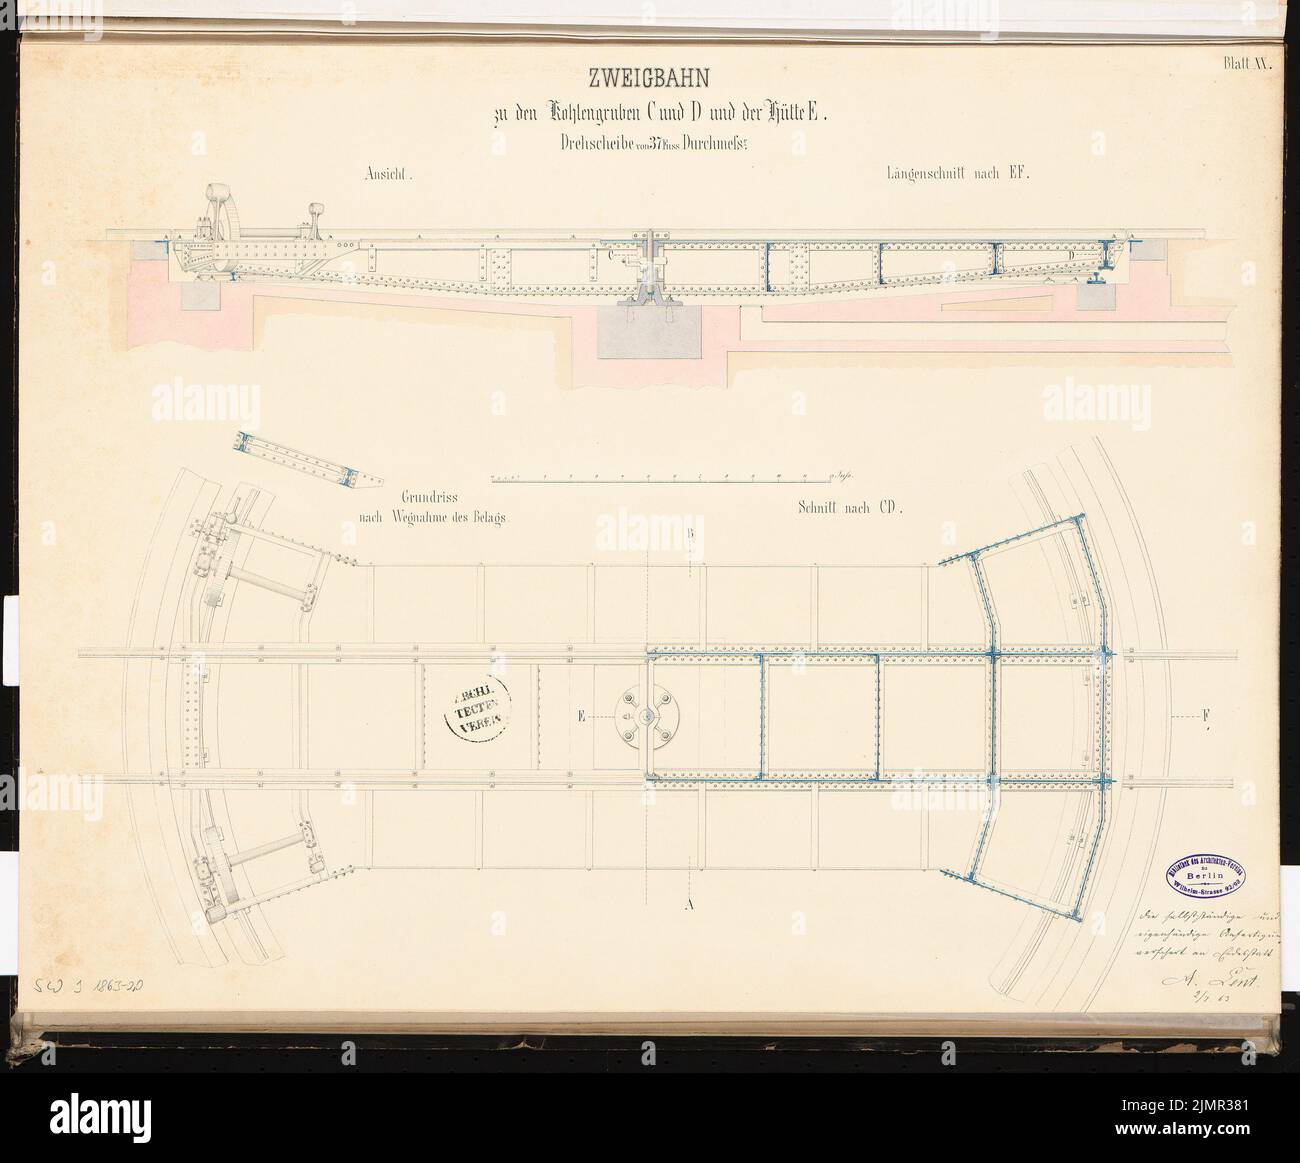 Lent Alfred (1836-1915), blast furnace system with a connecting railway. Schinkel competition 1863 (1863): Turntable: floor plan on 2 levels, outline side view; Scale bar. Tusche watercolor on the box, 52.3 x 63.4 cm (including scan edges) Lent Alfred  (1836-1915): Hochofenanlage mit Verbindungsbahn. Schinkelwettbewerb 1863 Stock Photo